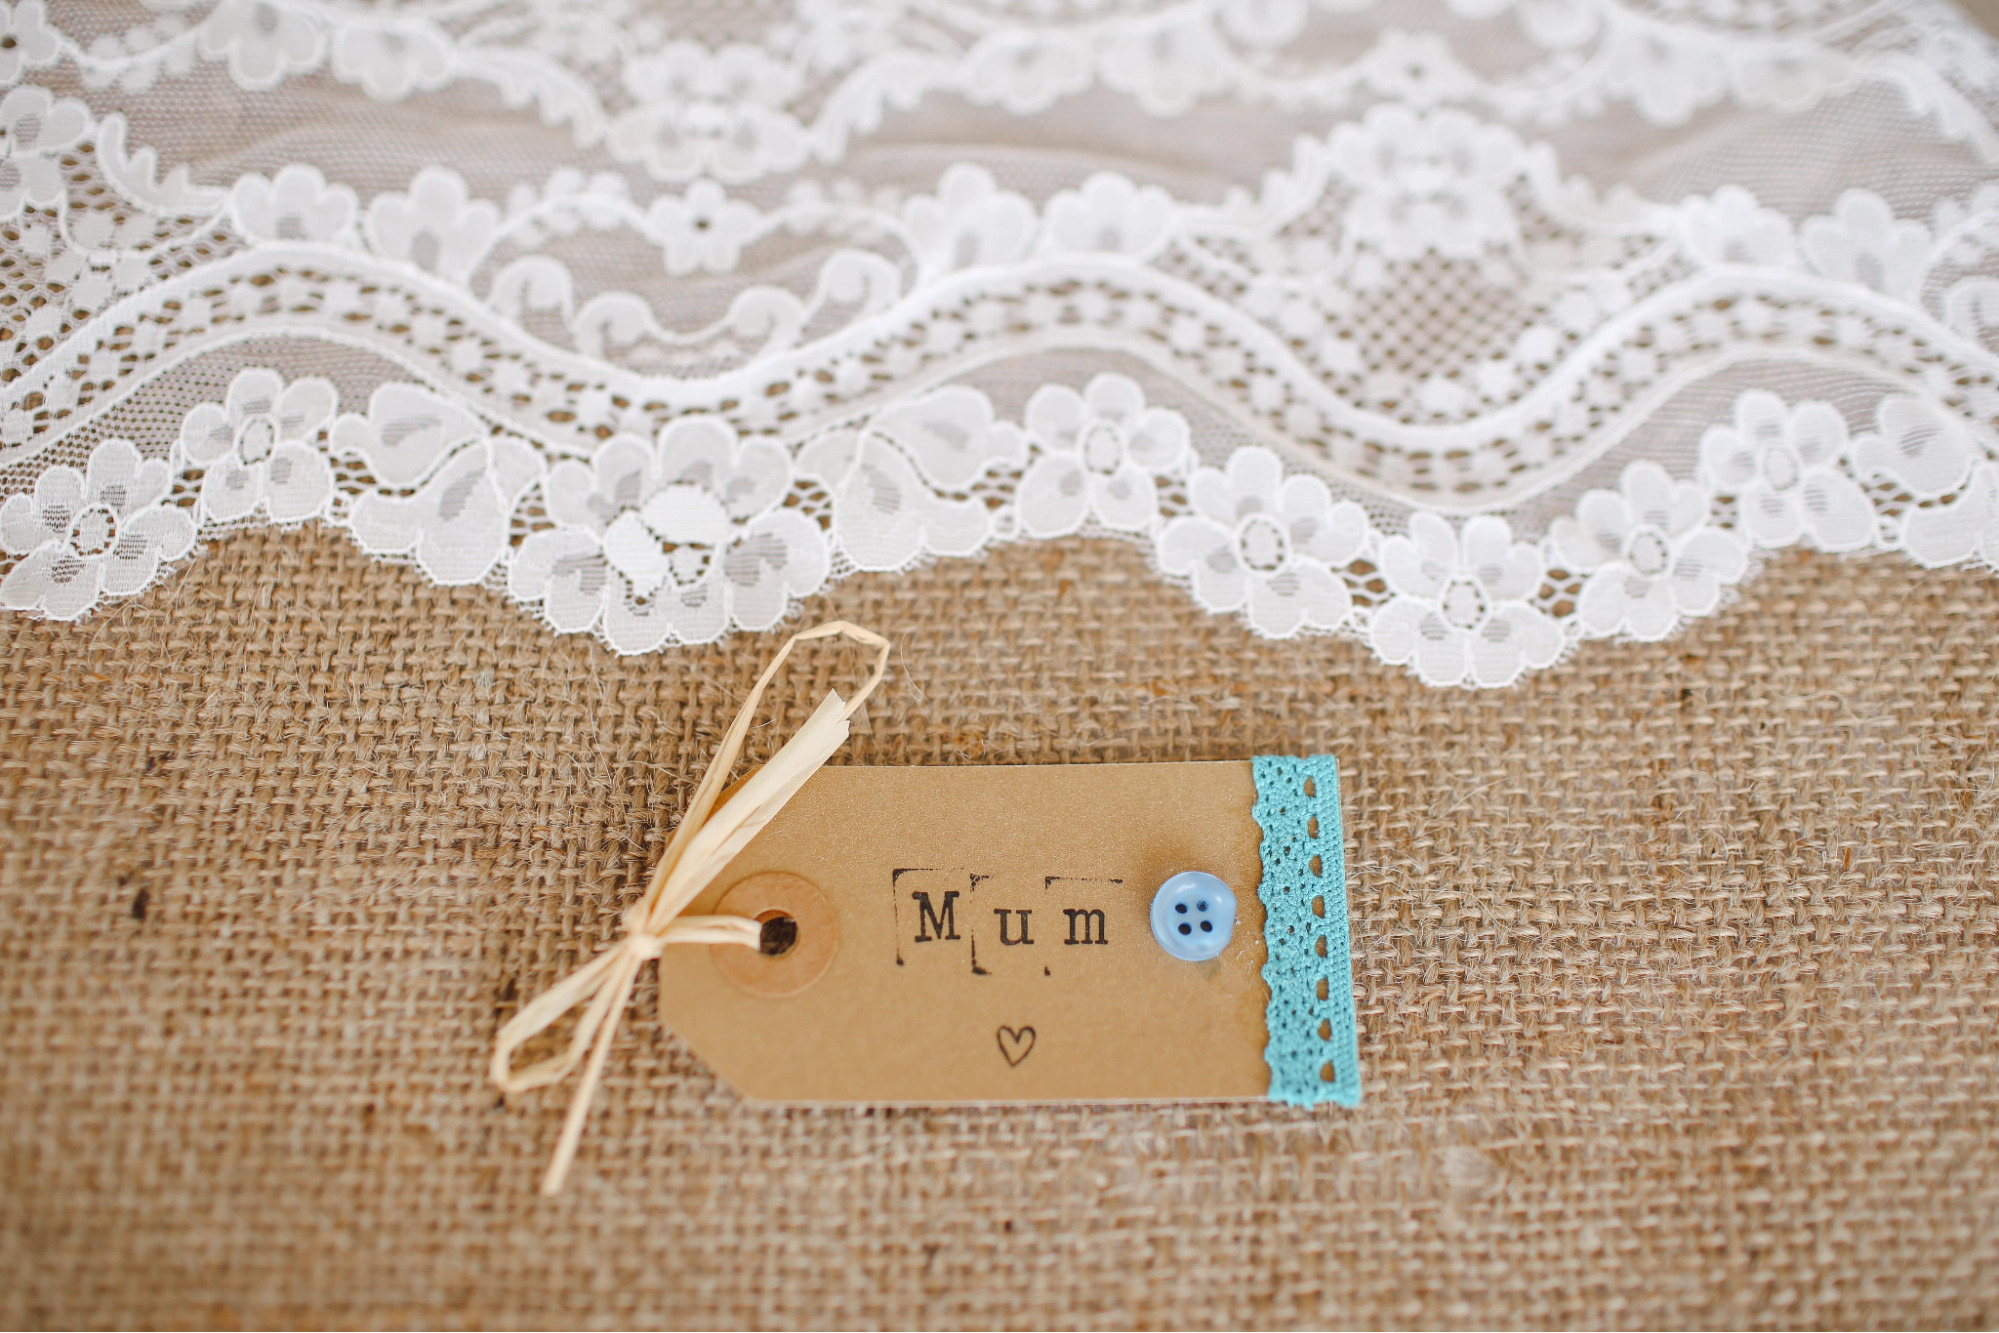 A homemade gift tag for a mother sits on a burlap and lace table runner